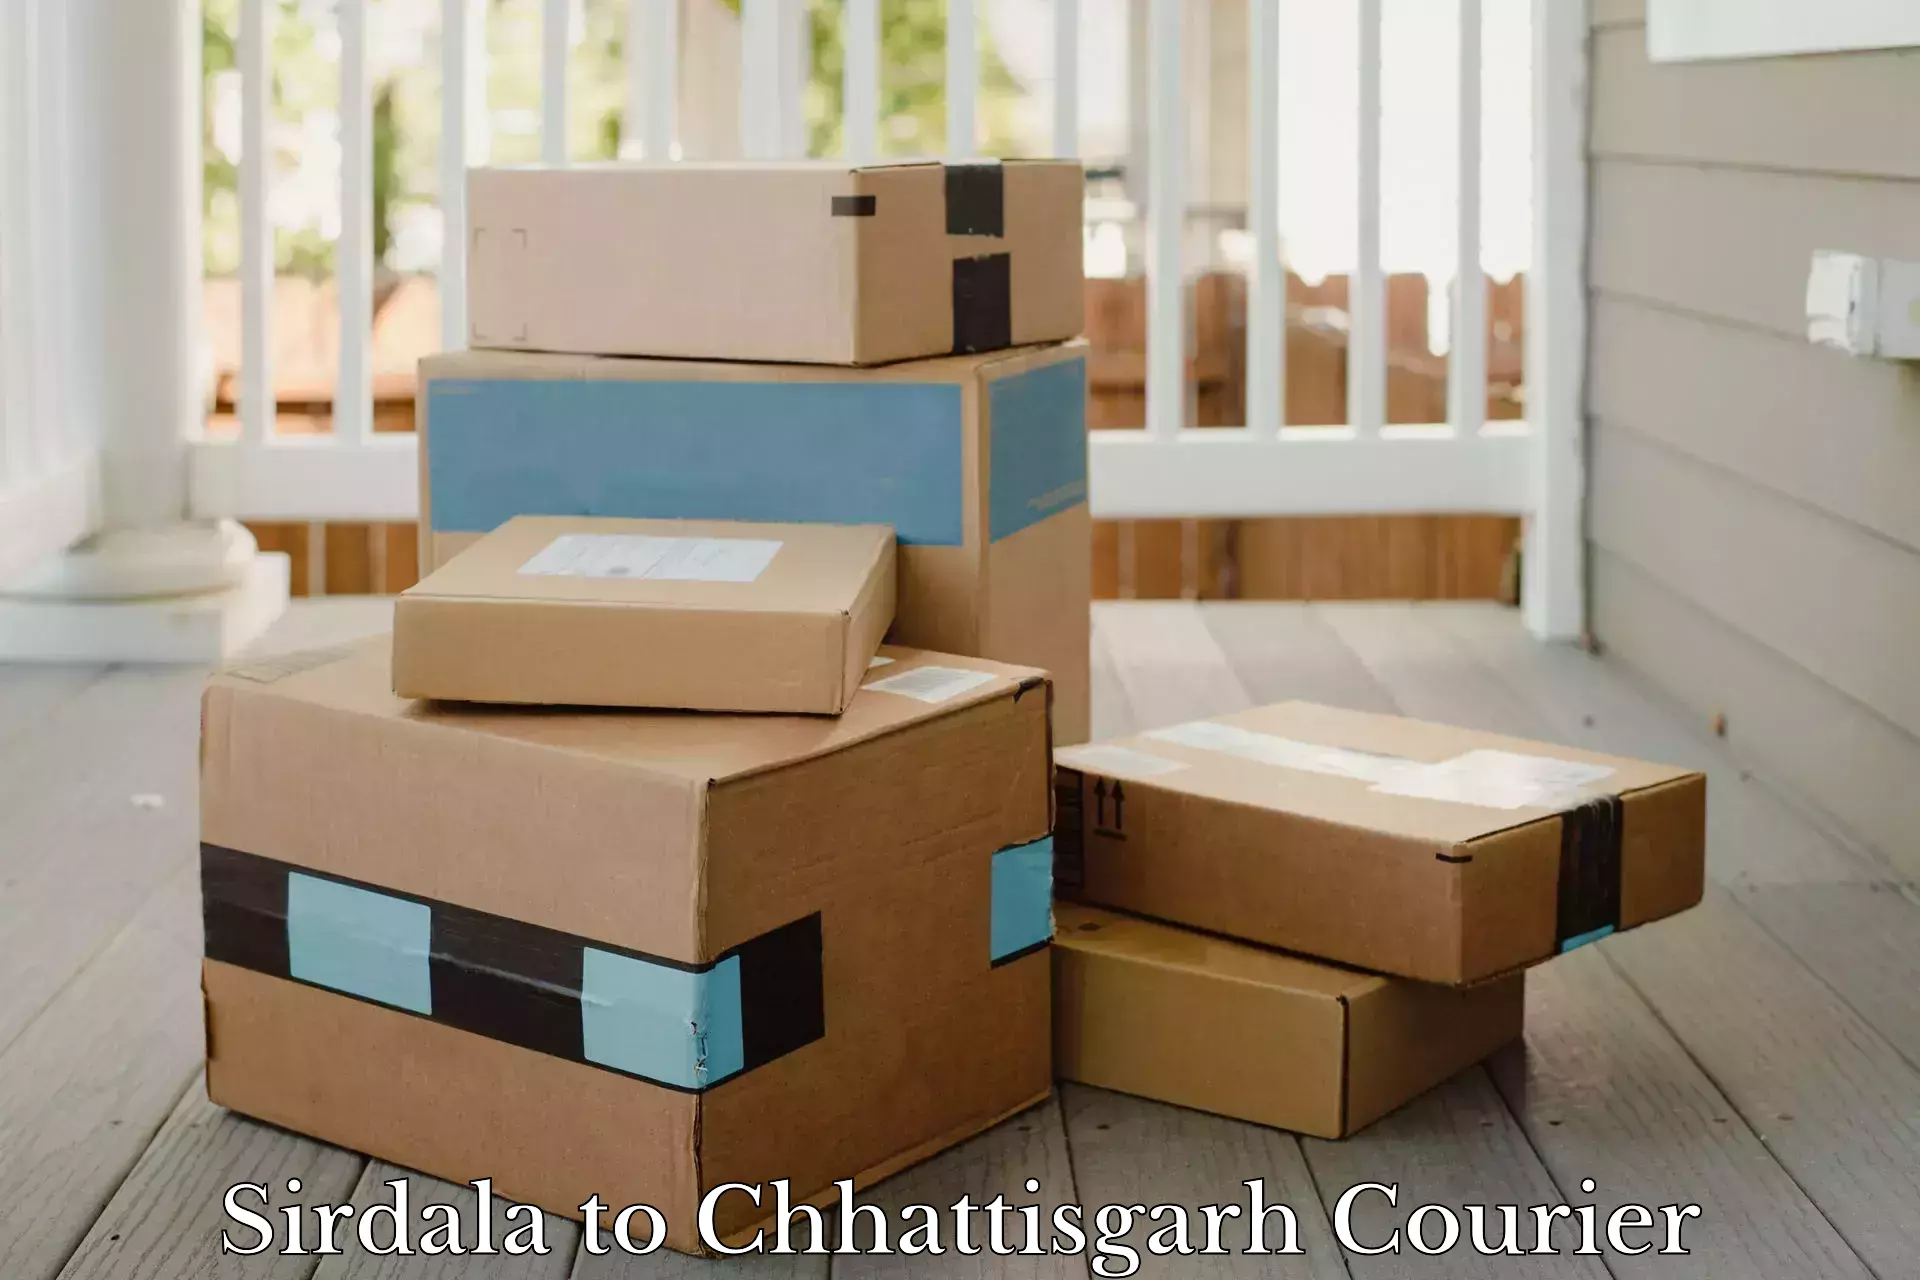 Business delivery service Sirdala to Mandhar